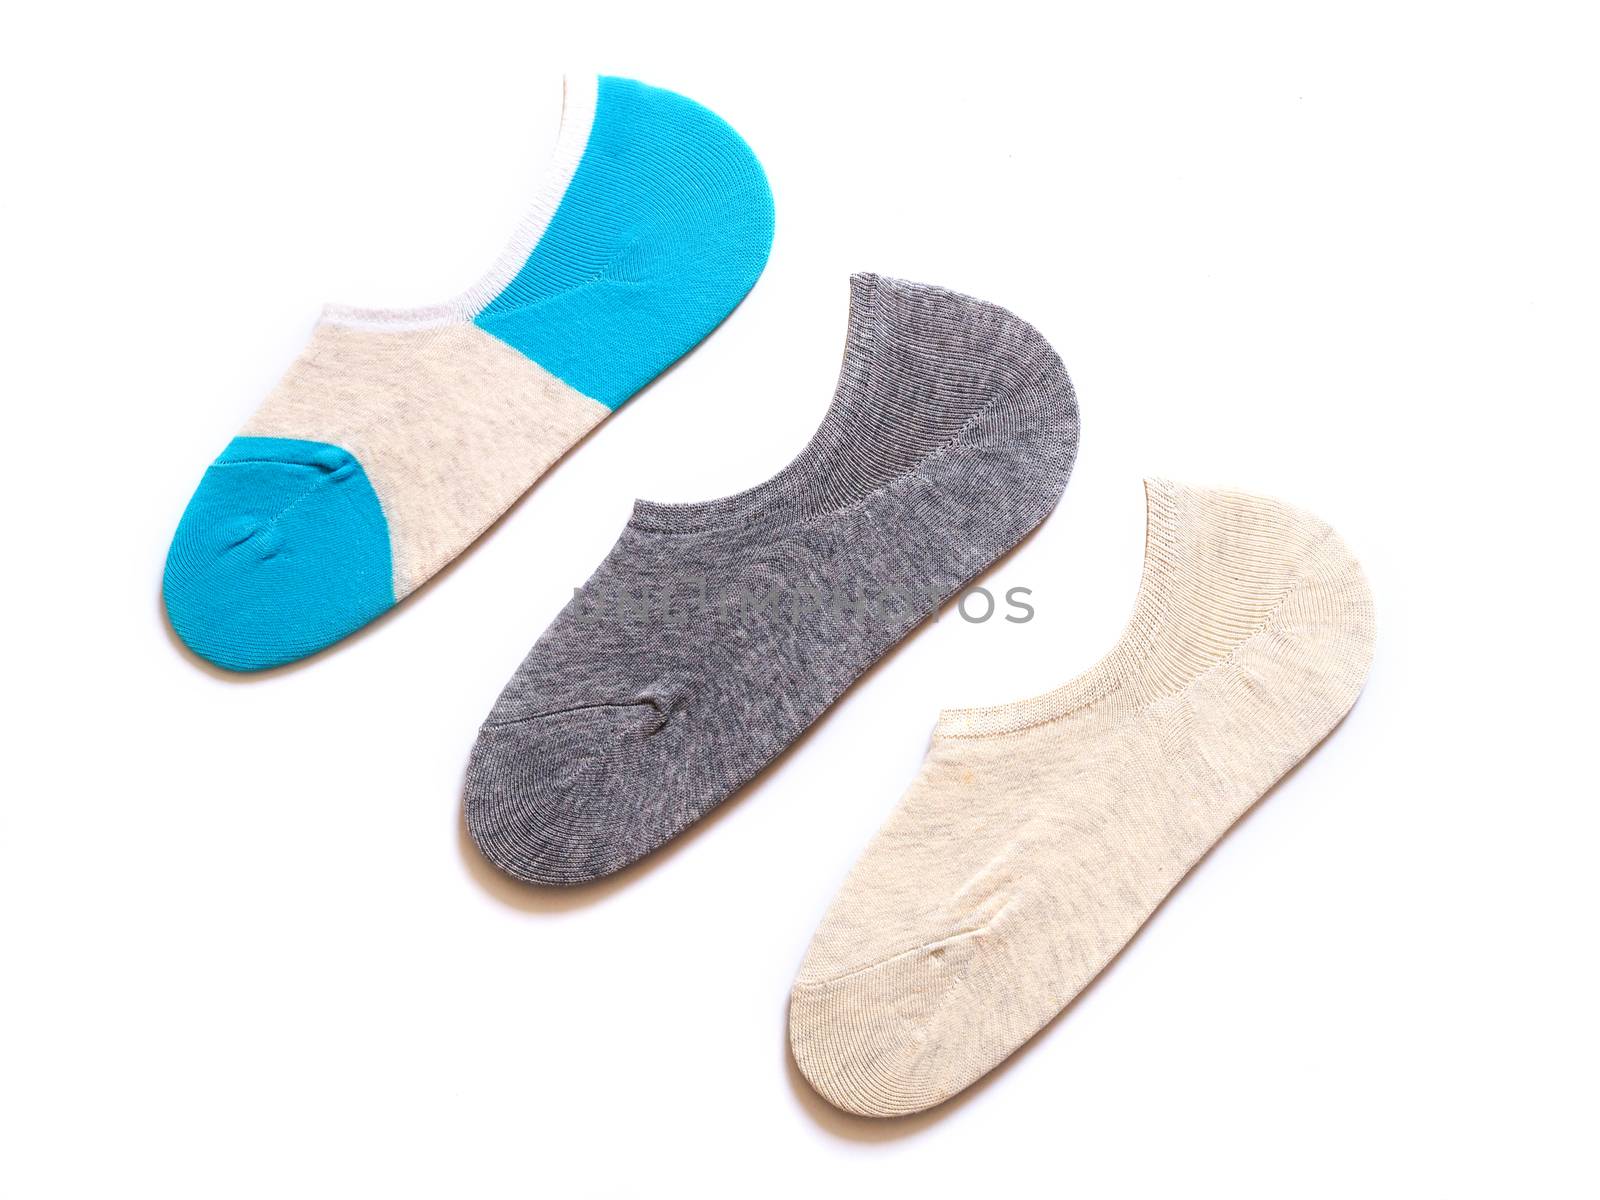 New collection of short socks Comfortable to foot wear. isolated on white background.